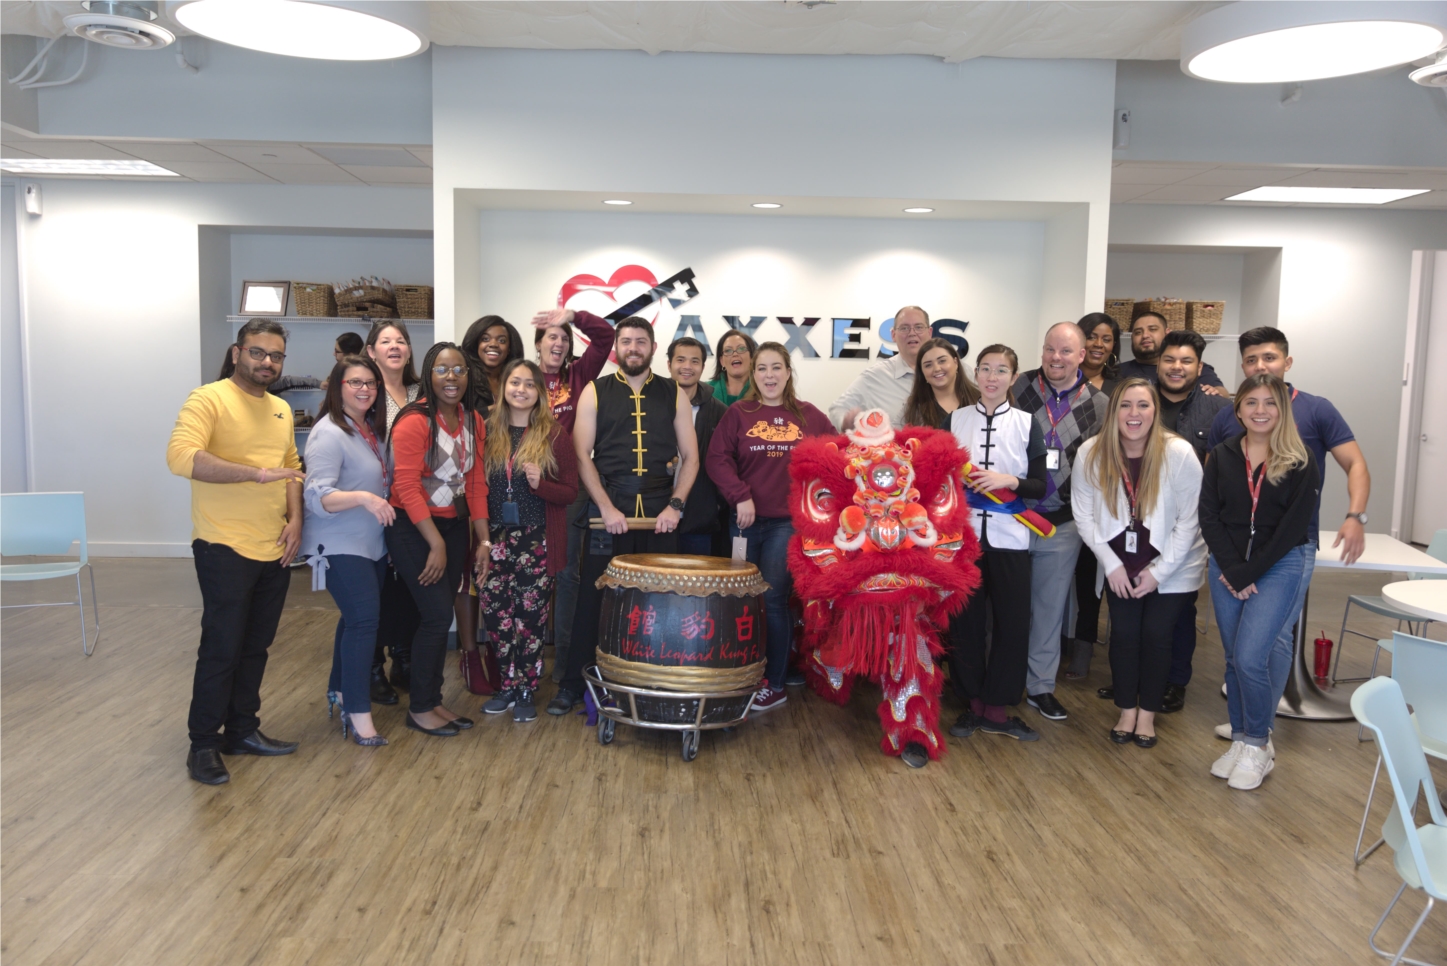 Axxess celebrates the Chinese New Year